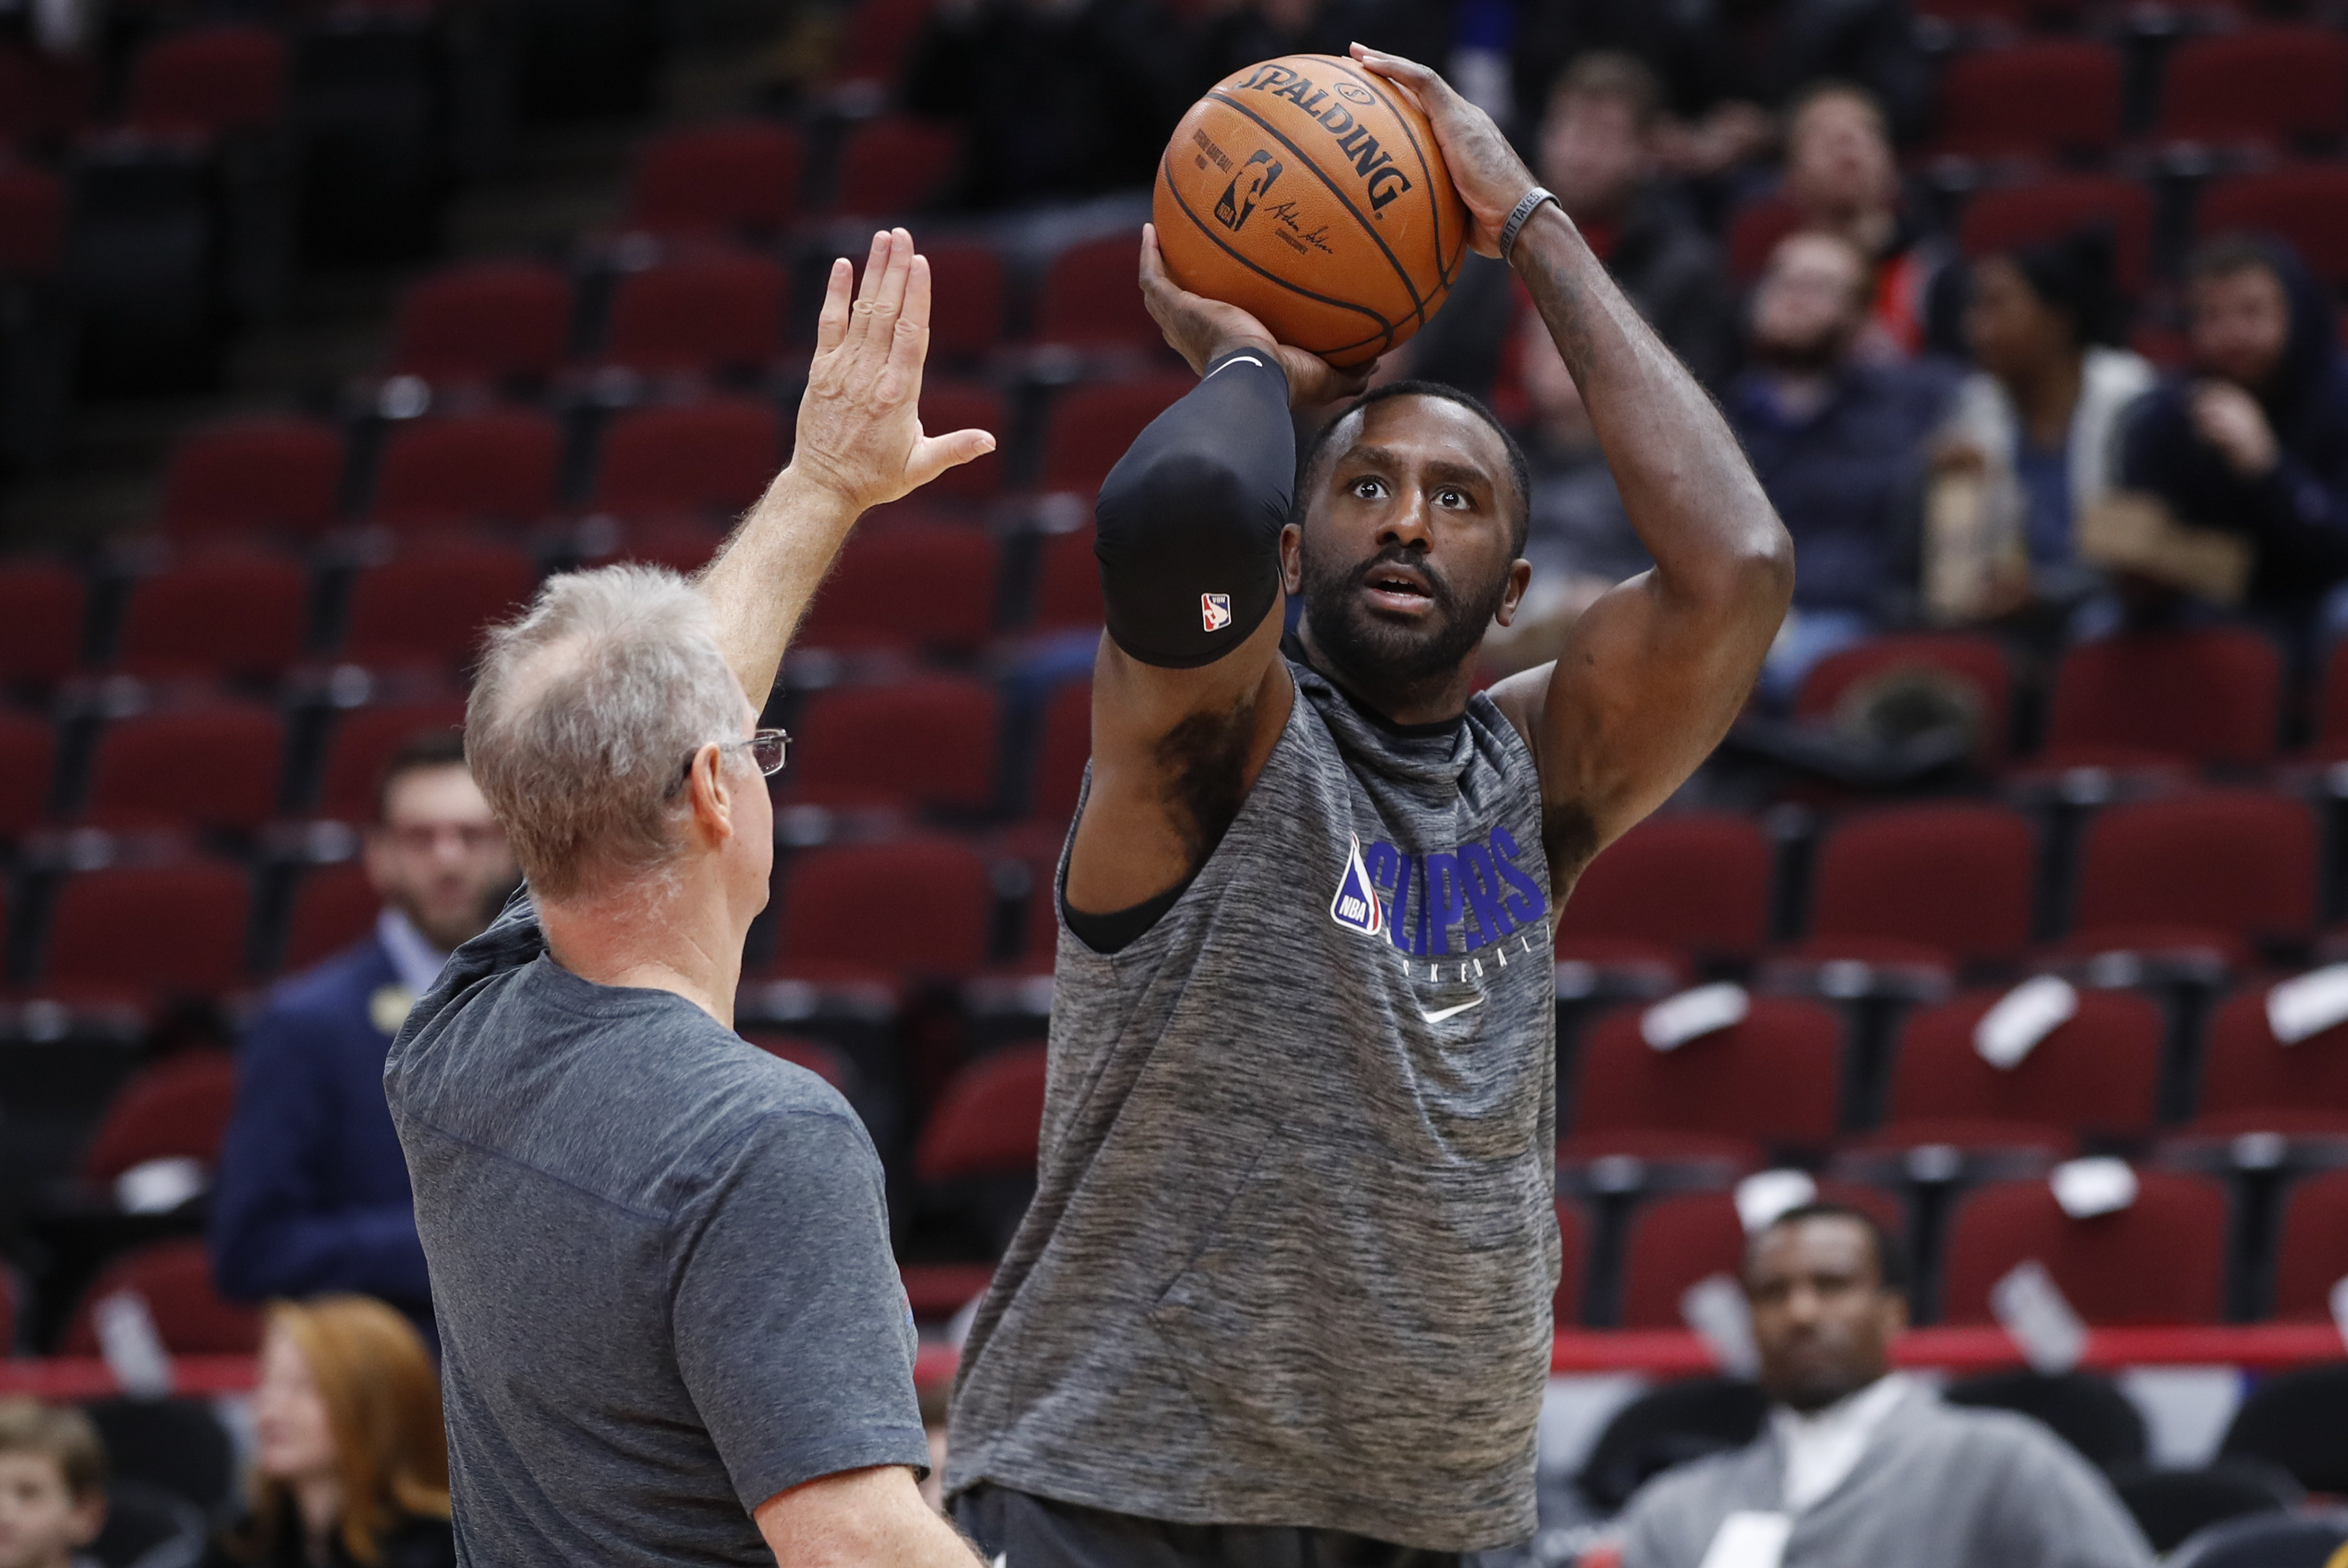 Patrick Patterson: The thrill of Draft night and getting picked by